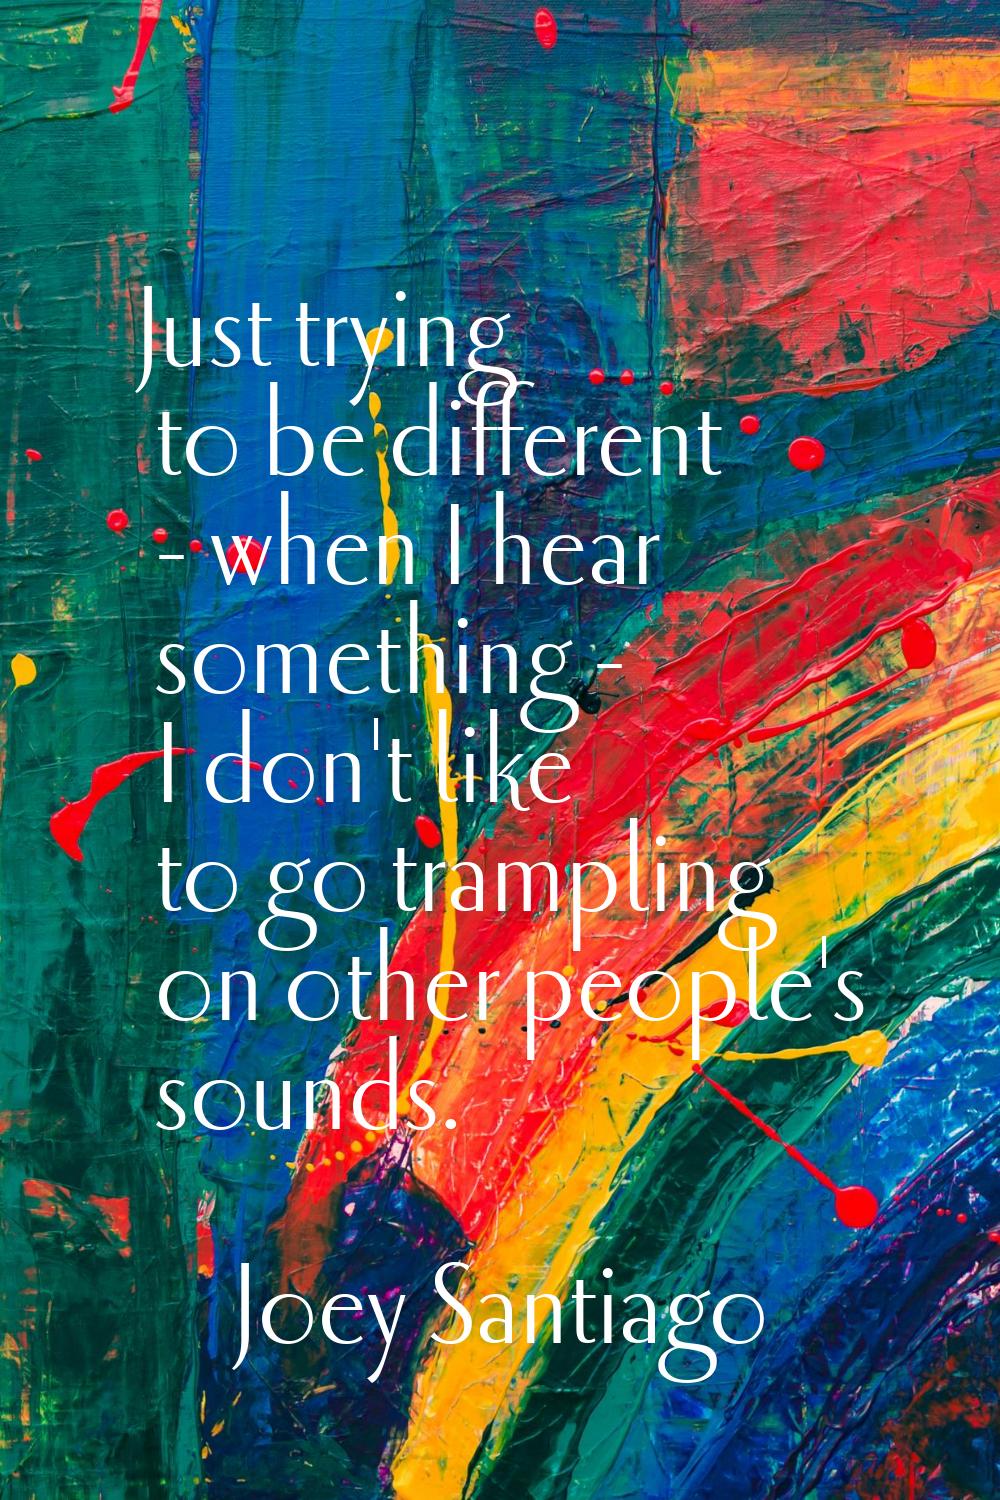 Just trying to be different - when I hear something - I don't like to go trampling on other people'